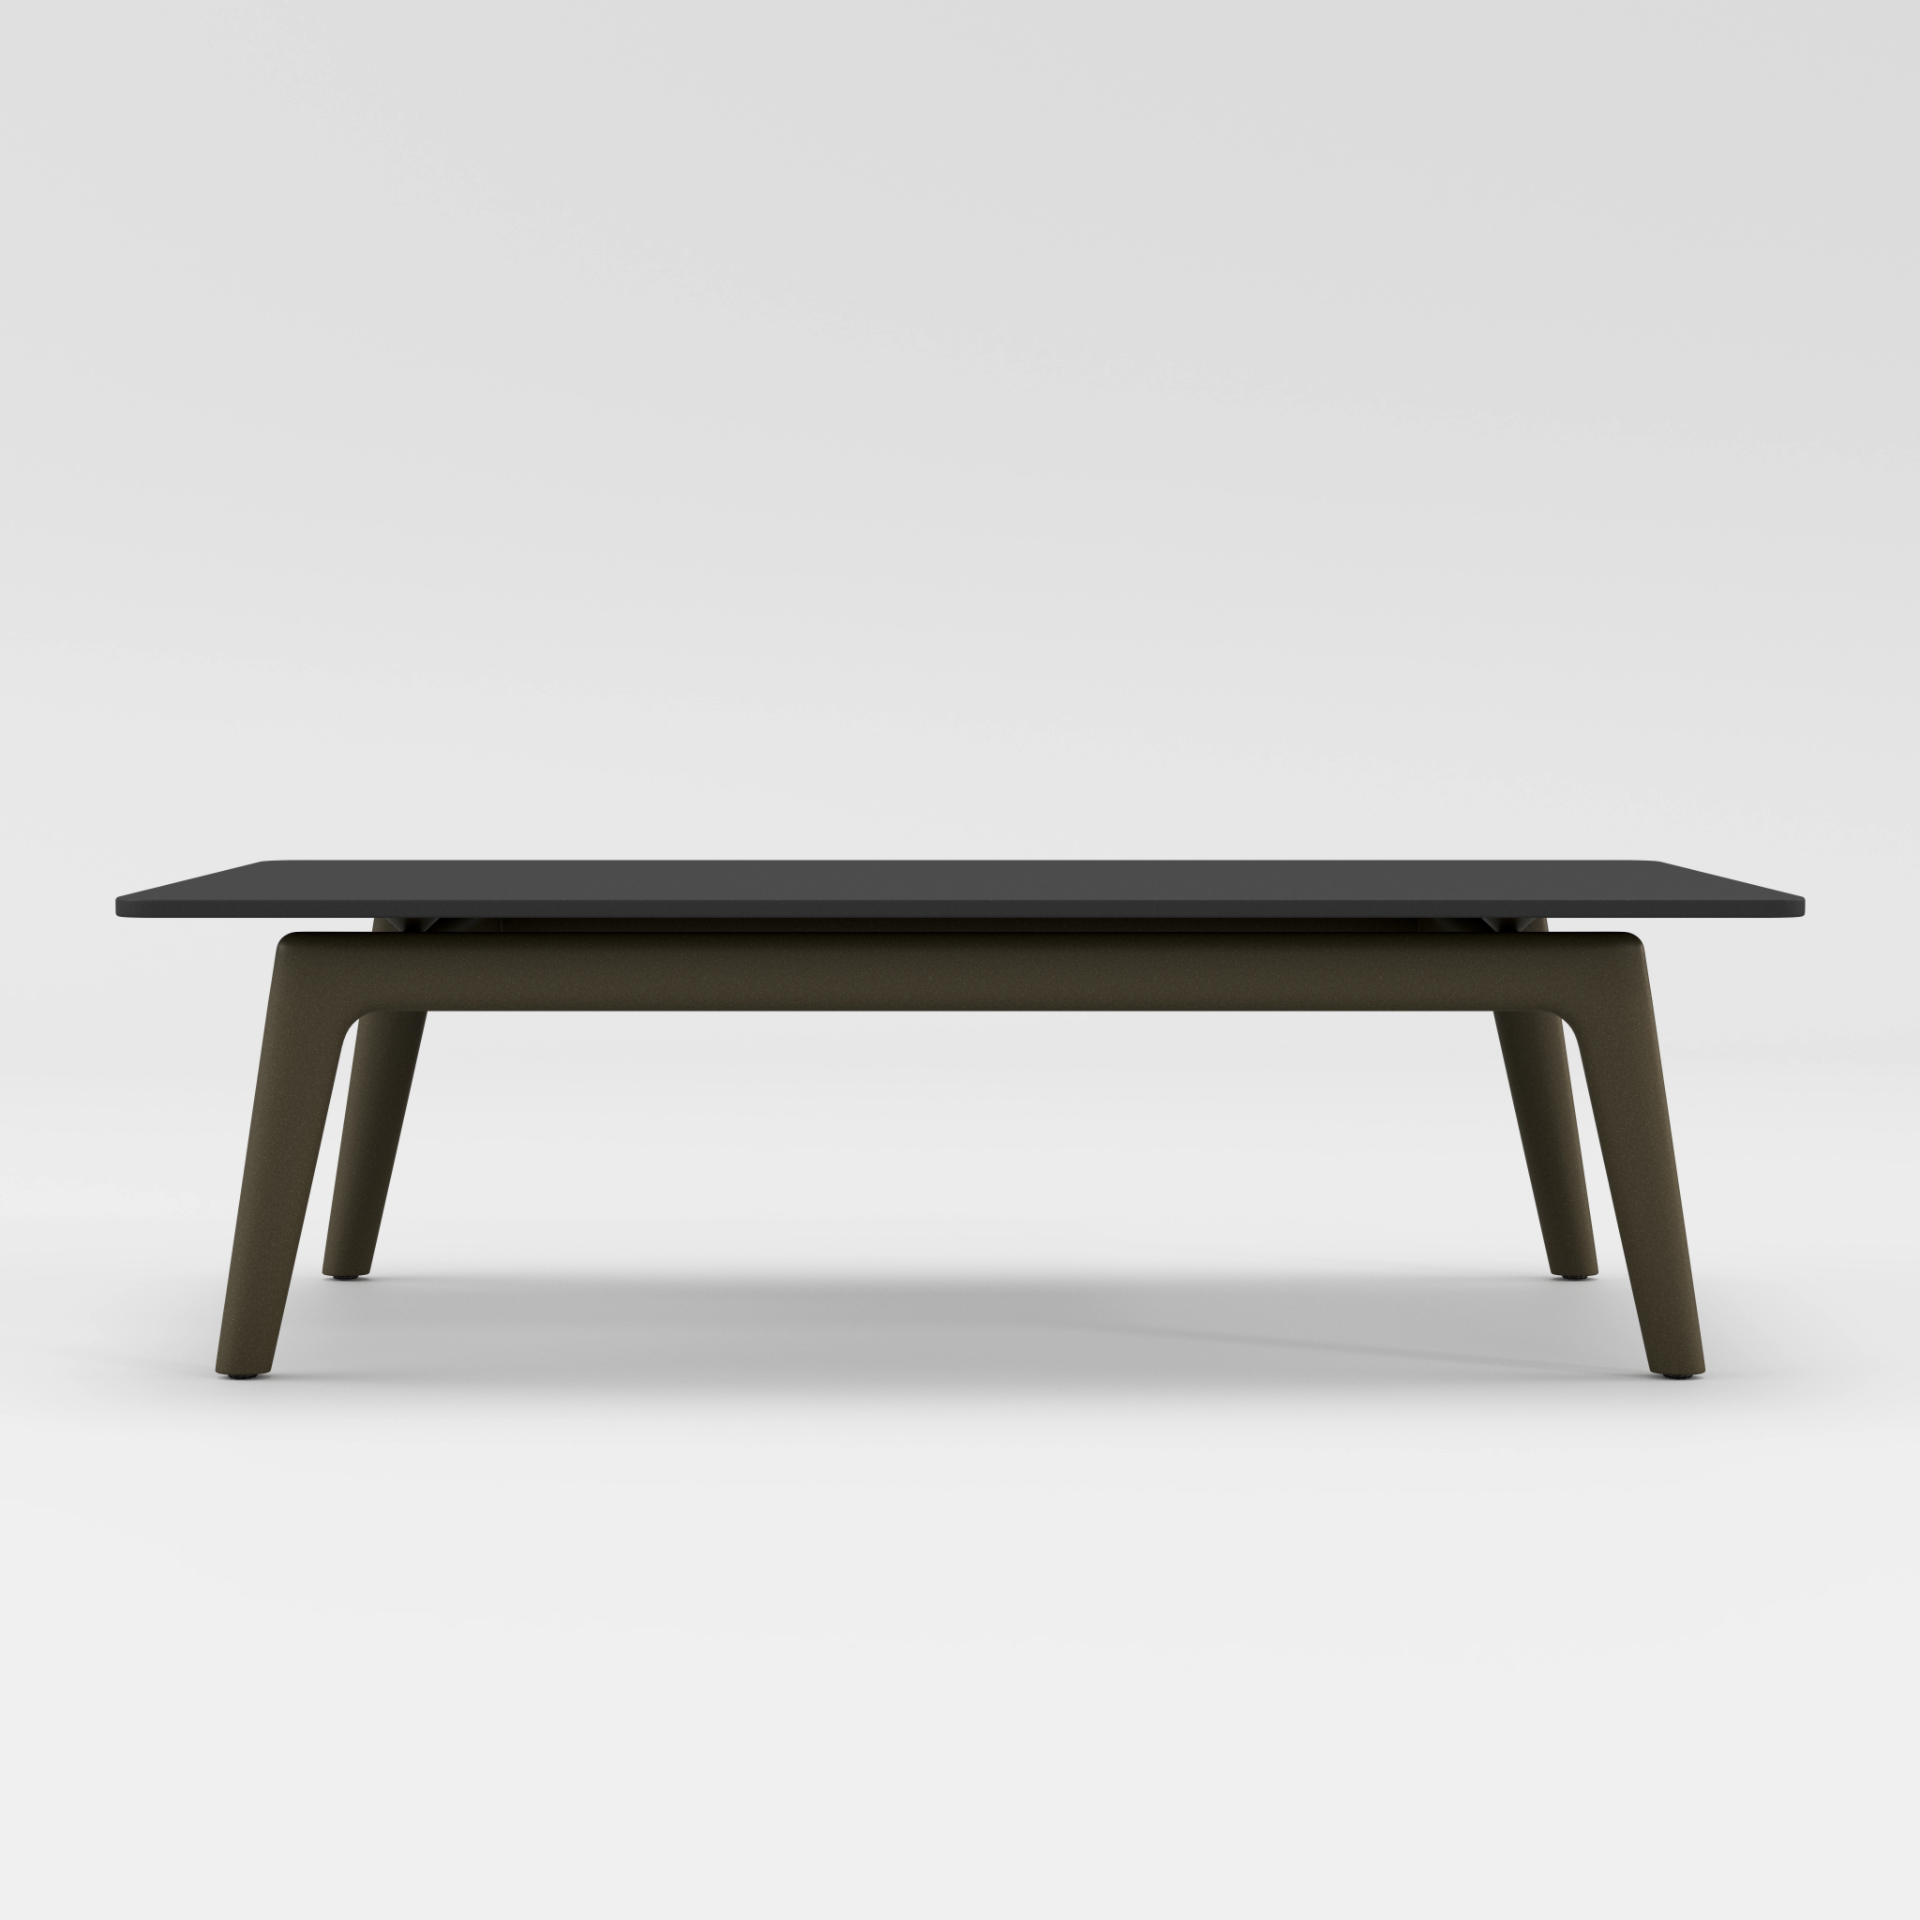 H 21” X 42” Small Coffee Table by Brown Jordan